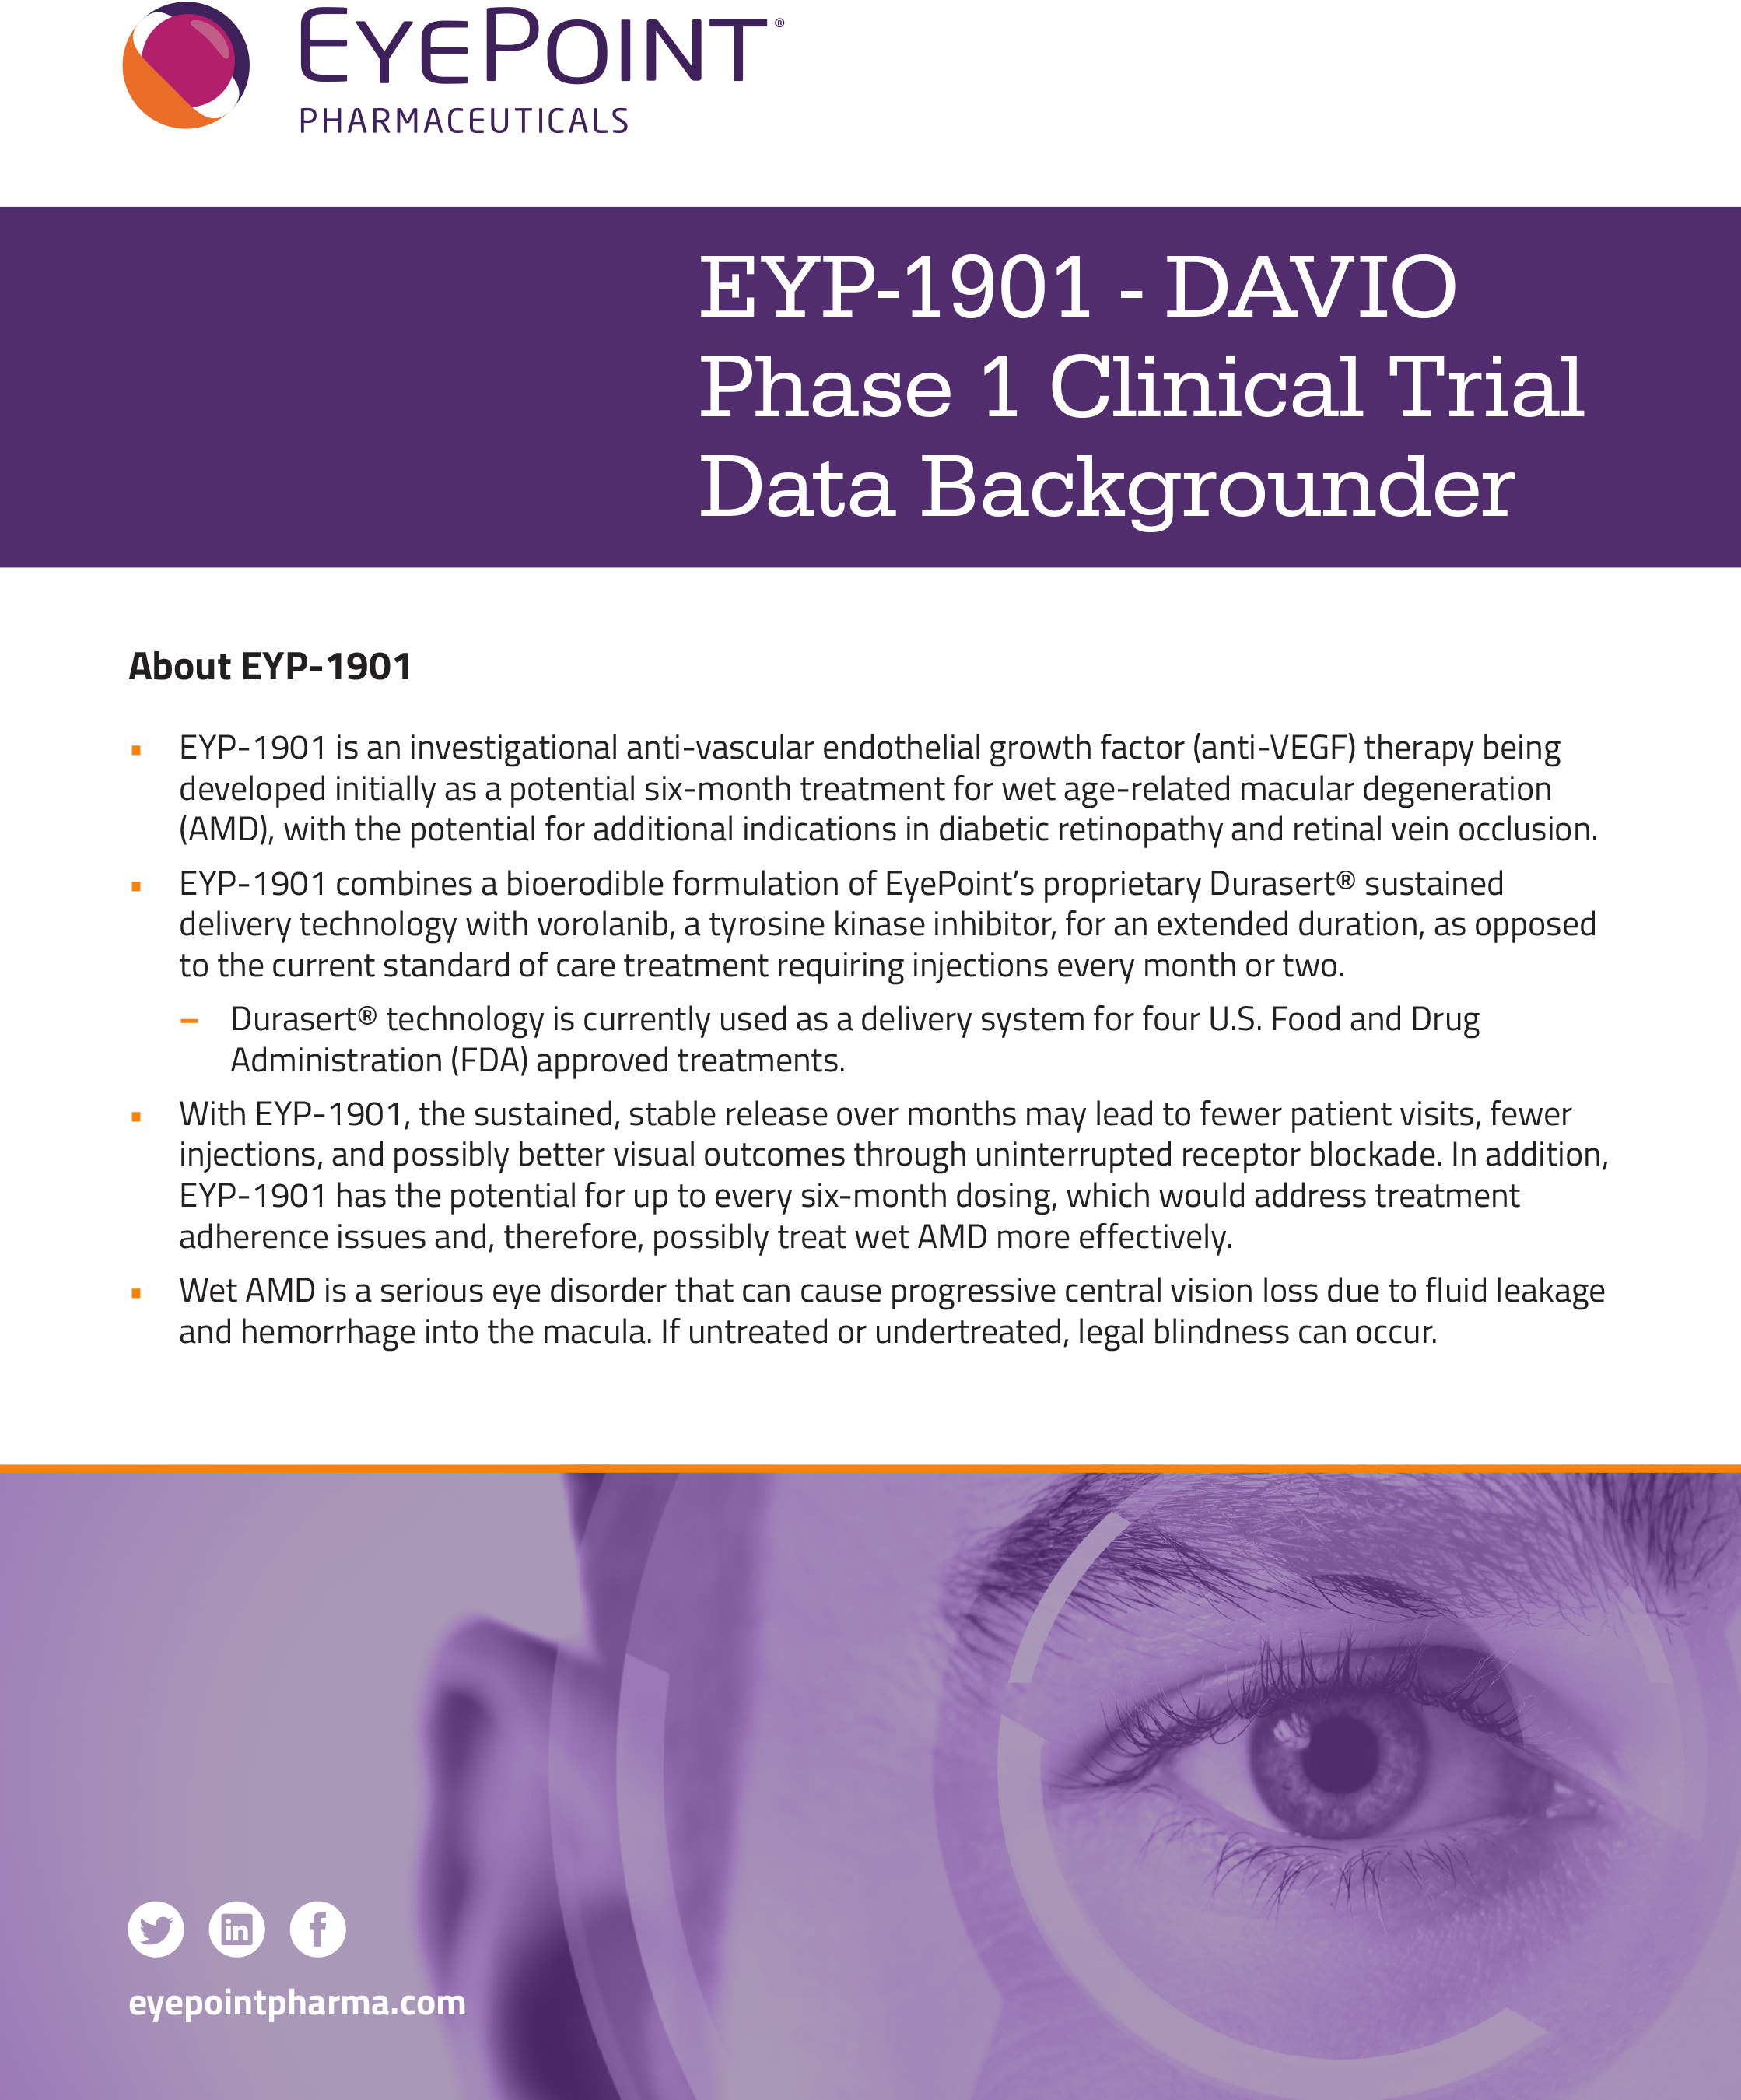 Learn more about EYP-1901 and the DAVIO trial